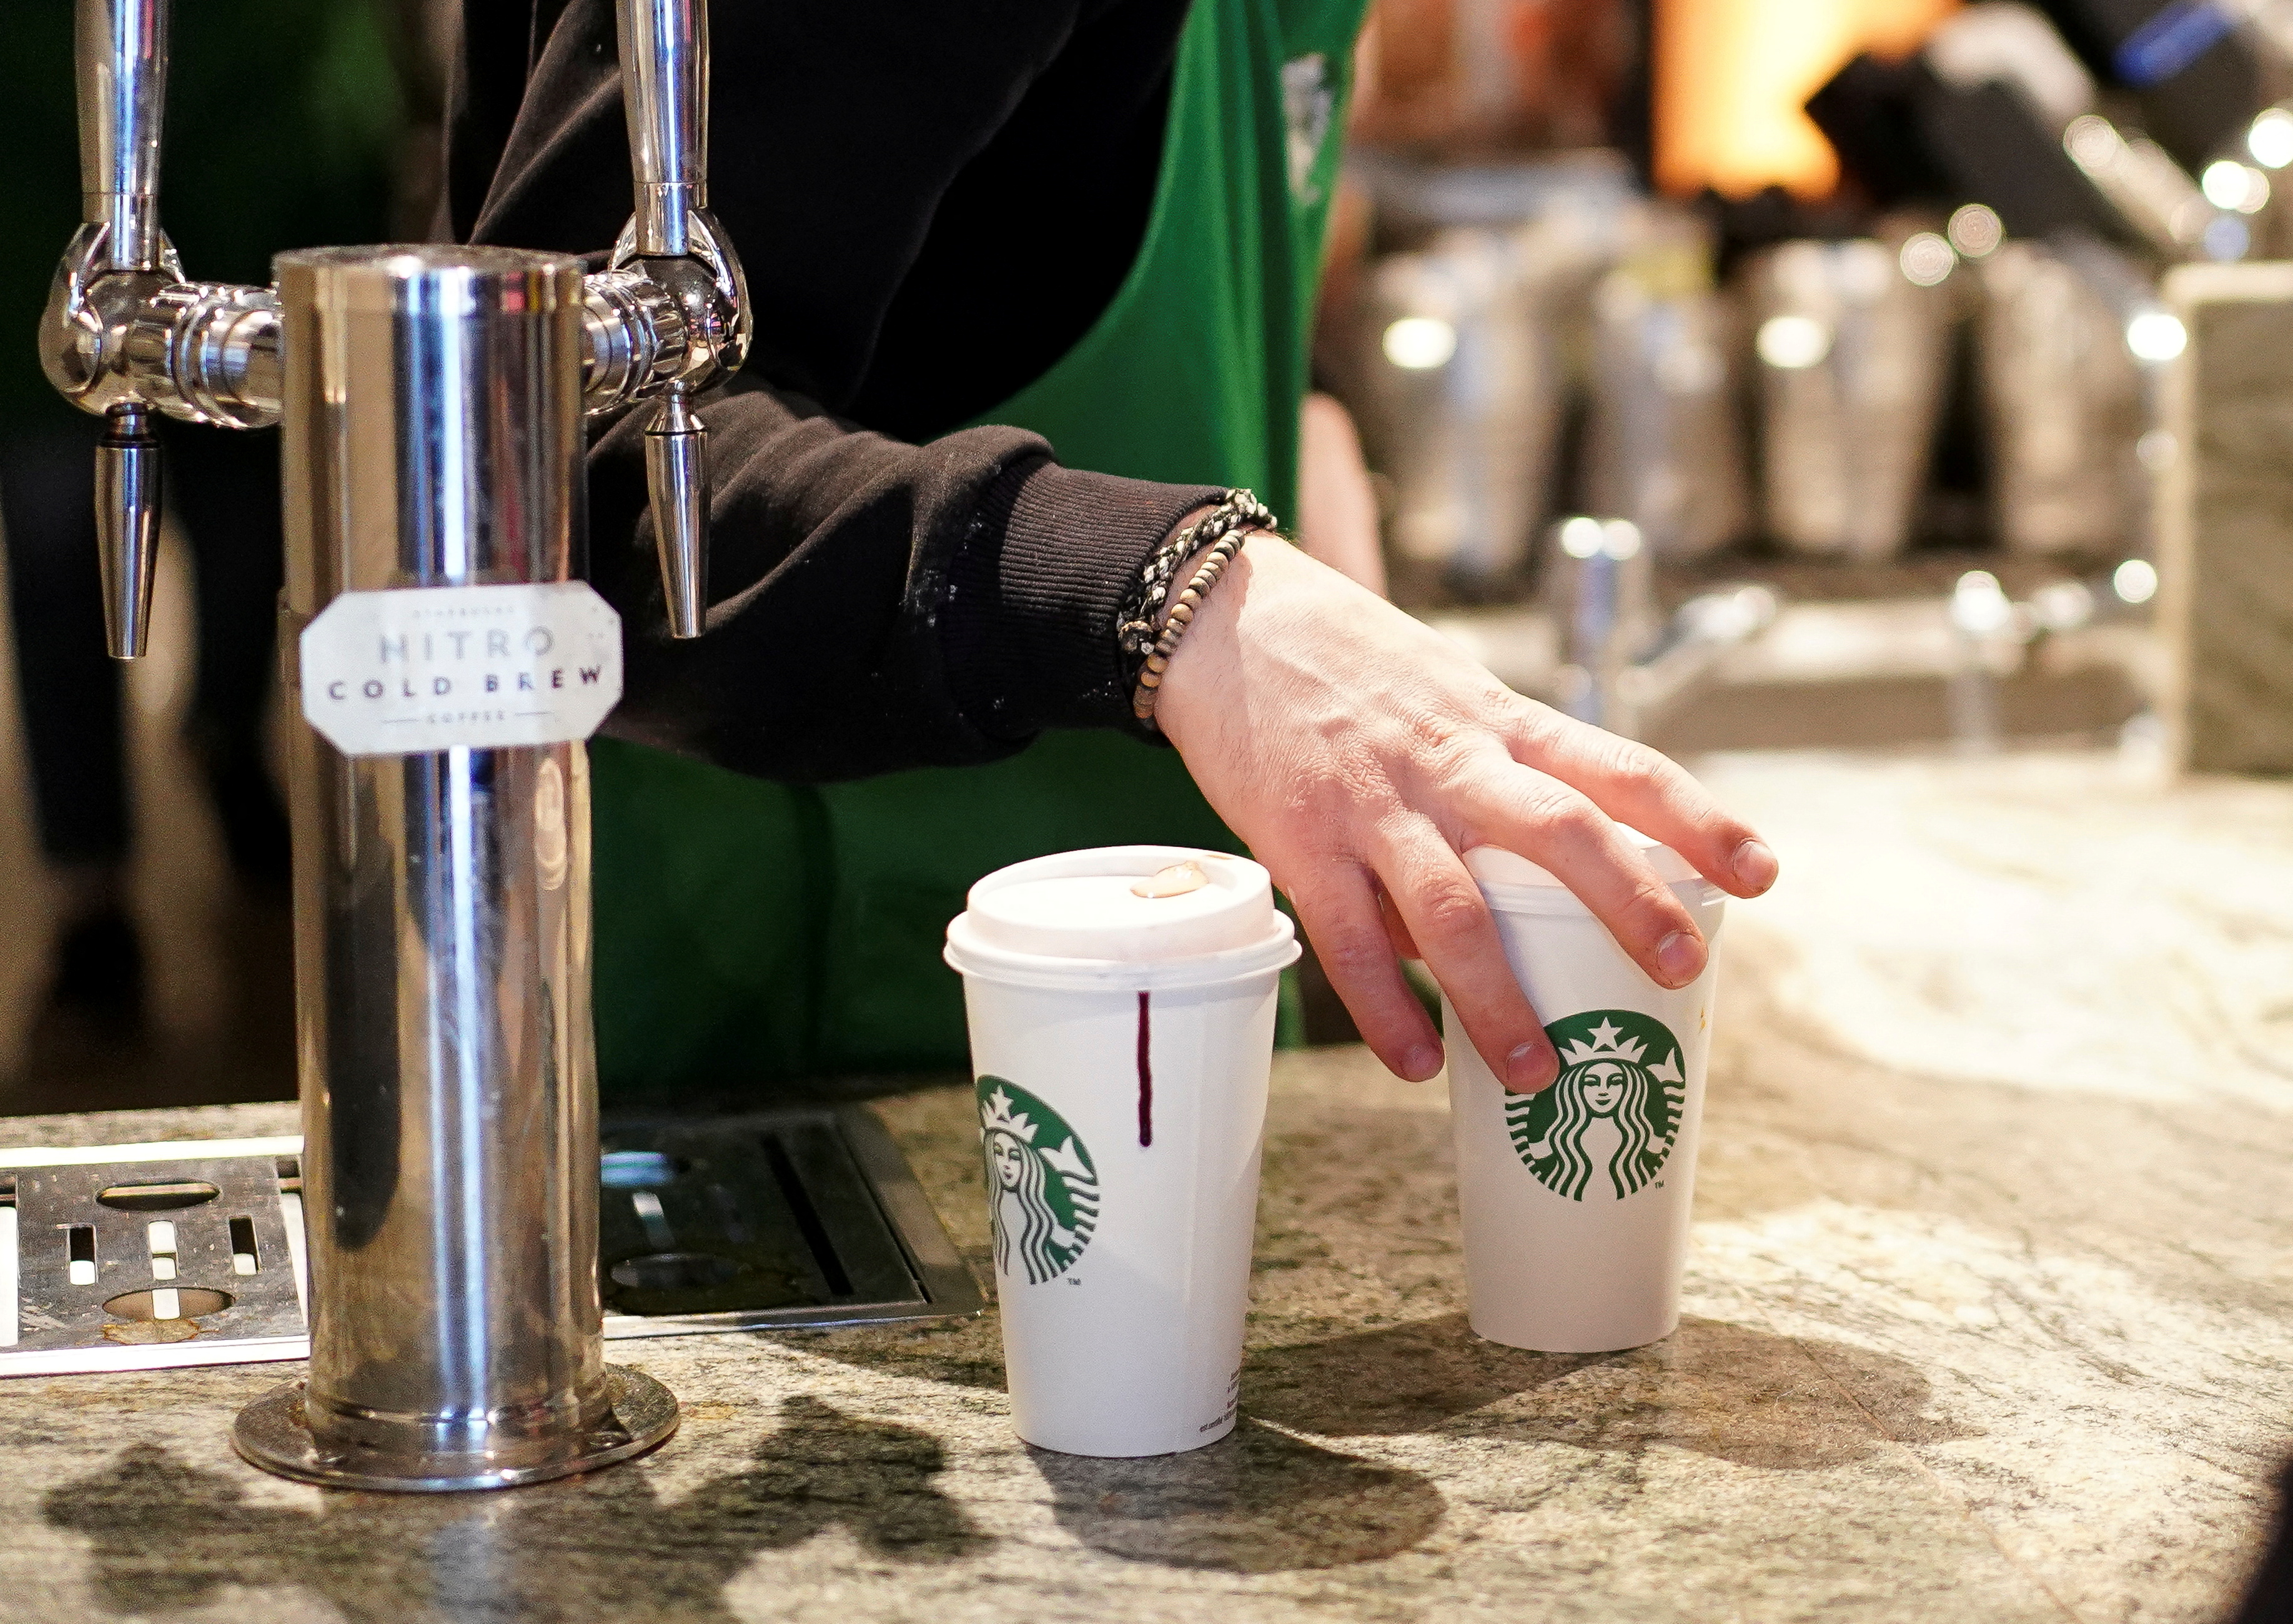 Are Starbucks Cups Reusable?